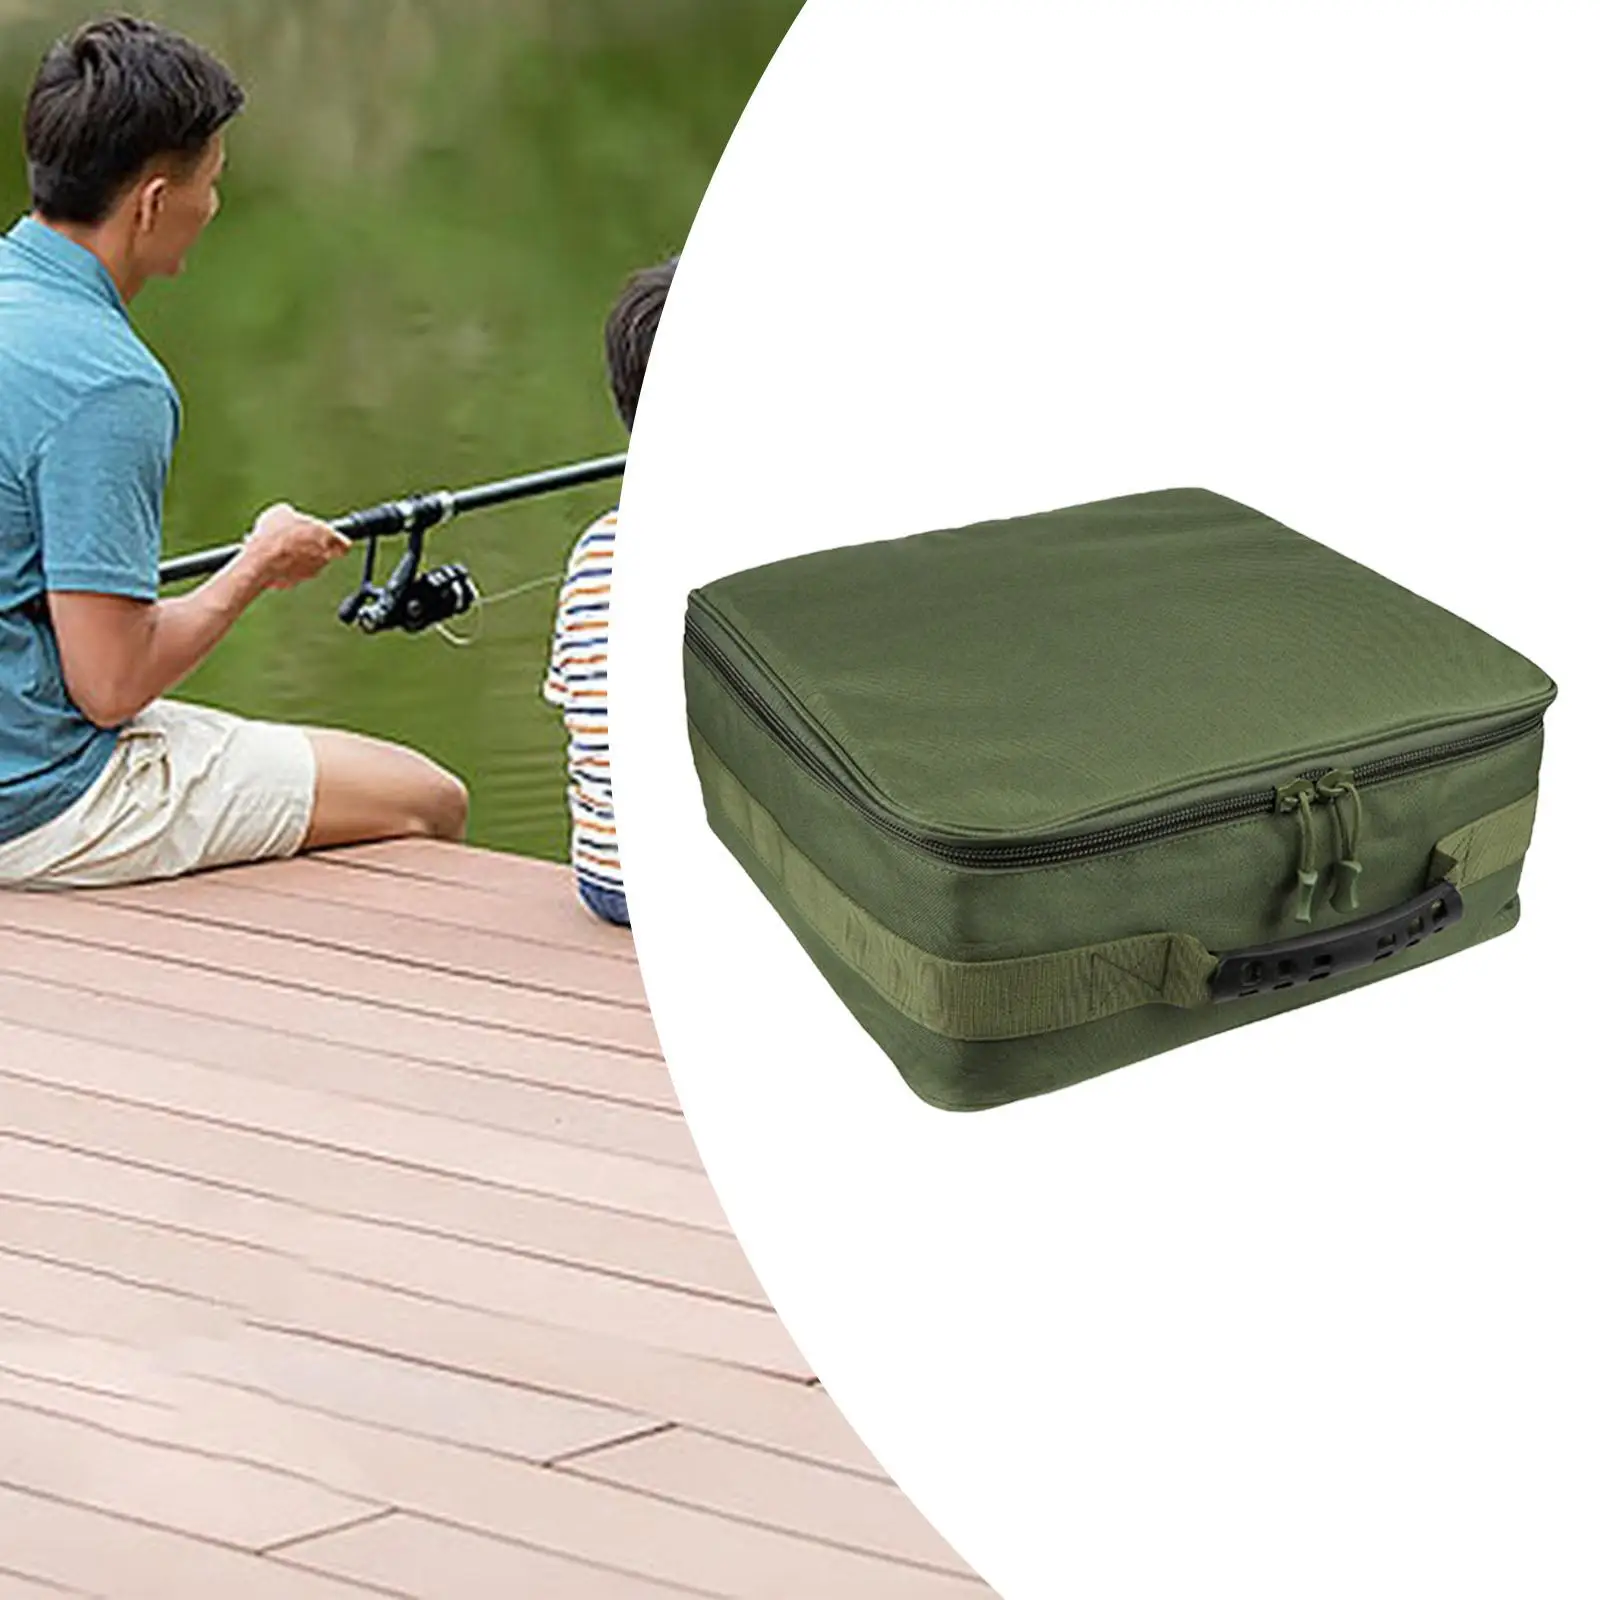 

Fishing Reel Storage Bag Fishing Accessory Oxford Cloth Portable Water Resistant Outdoor Handled Multipurpose Fishing Bag